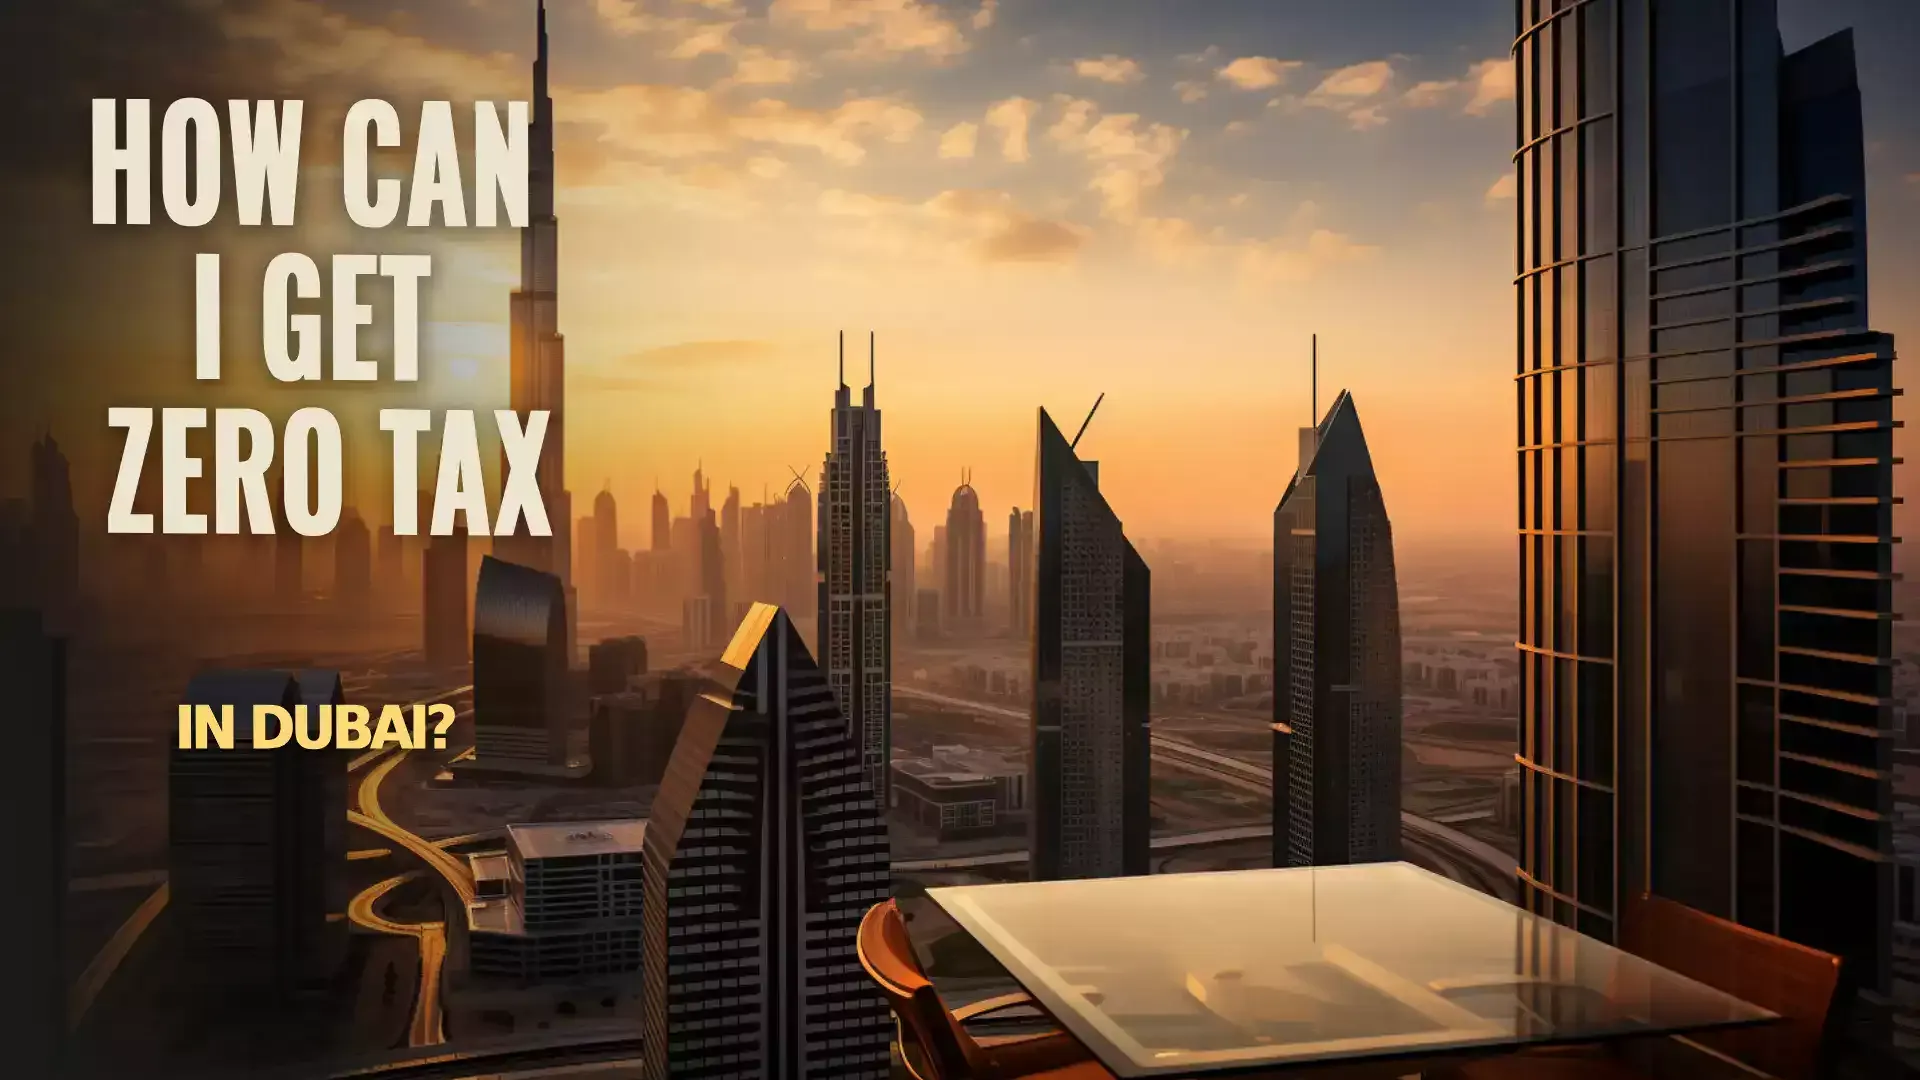 Image showcasing the advantages of zero tax policies in Dubai